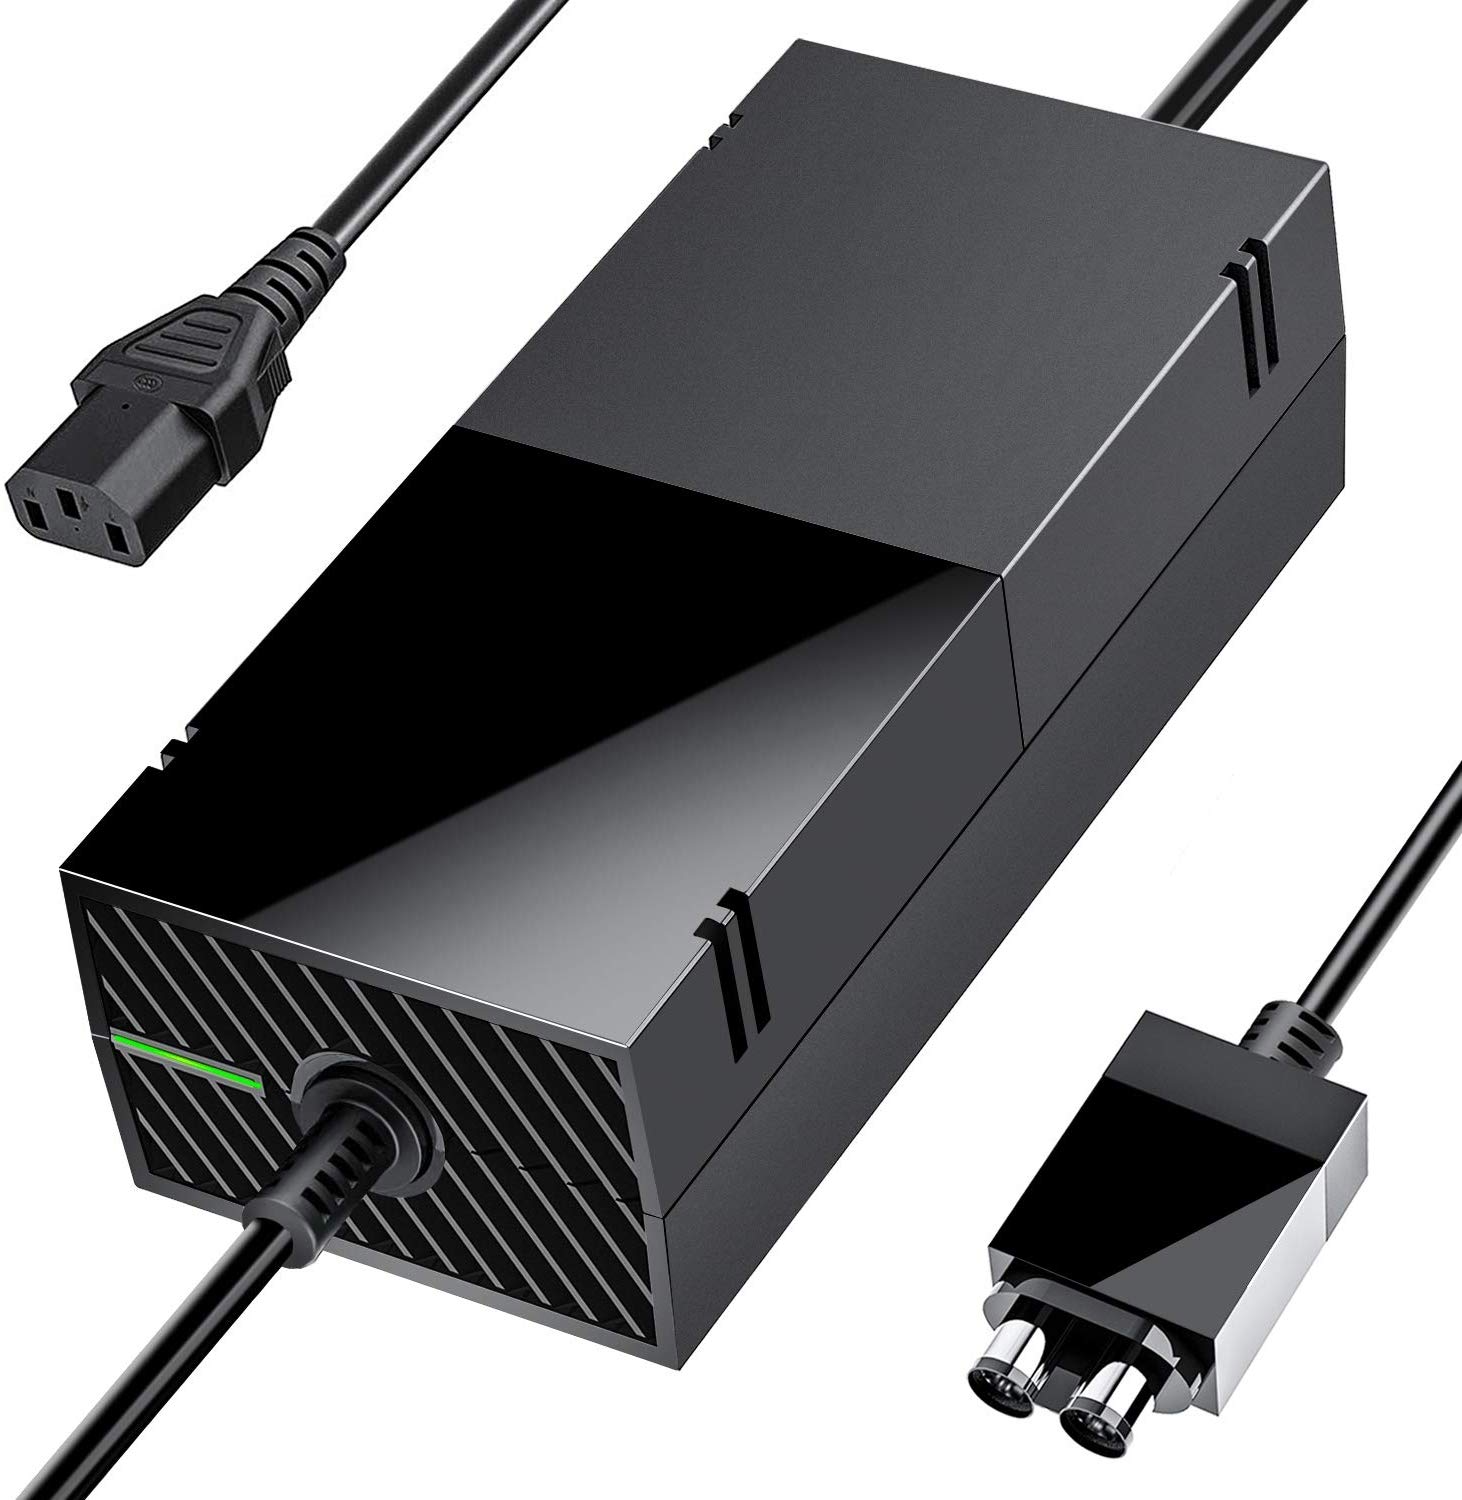 Xbox One Power Supply Brick, ESYWEN AC Adapter Charger Replacement for Xbox One with Cable 100-240V – Super Quiet Version